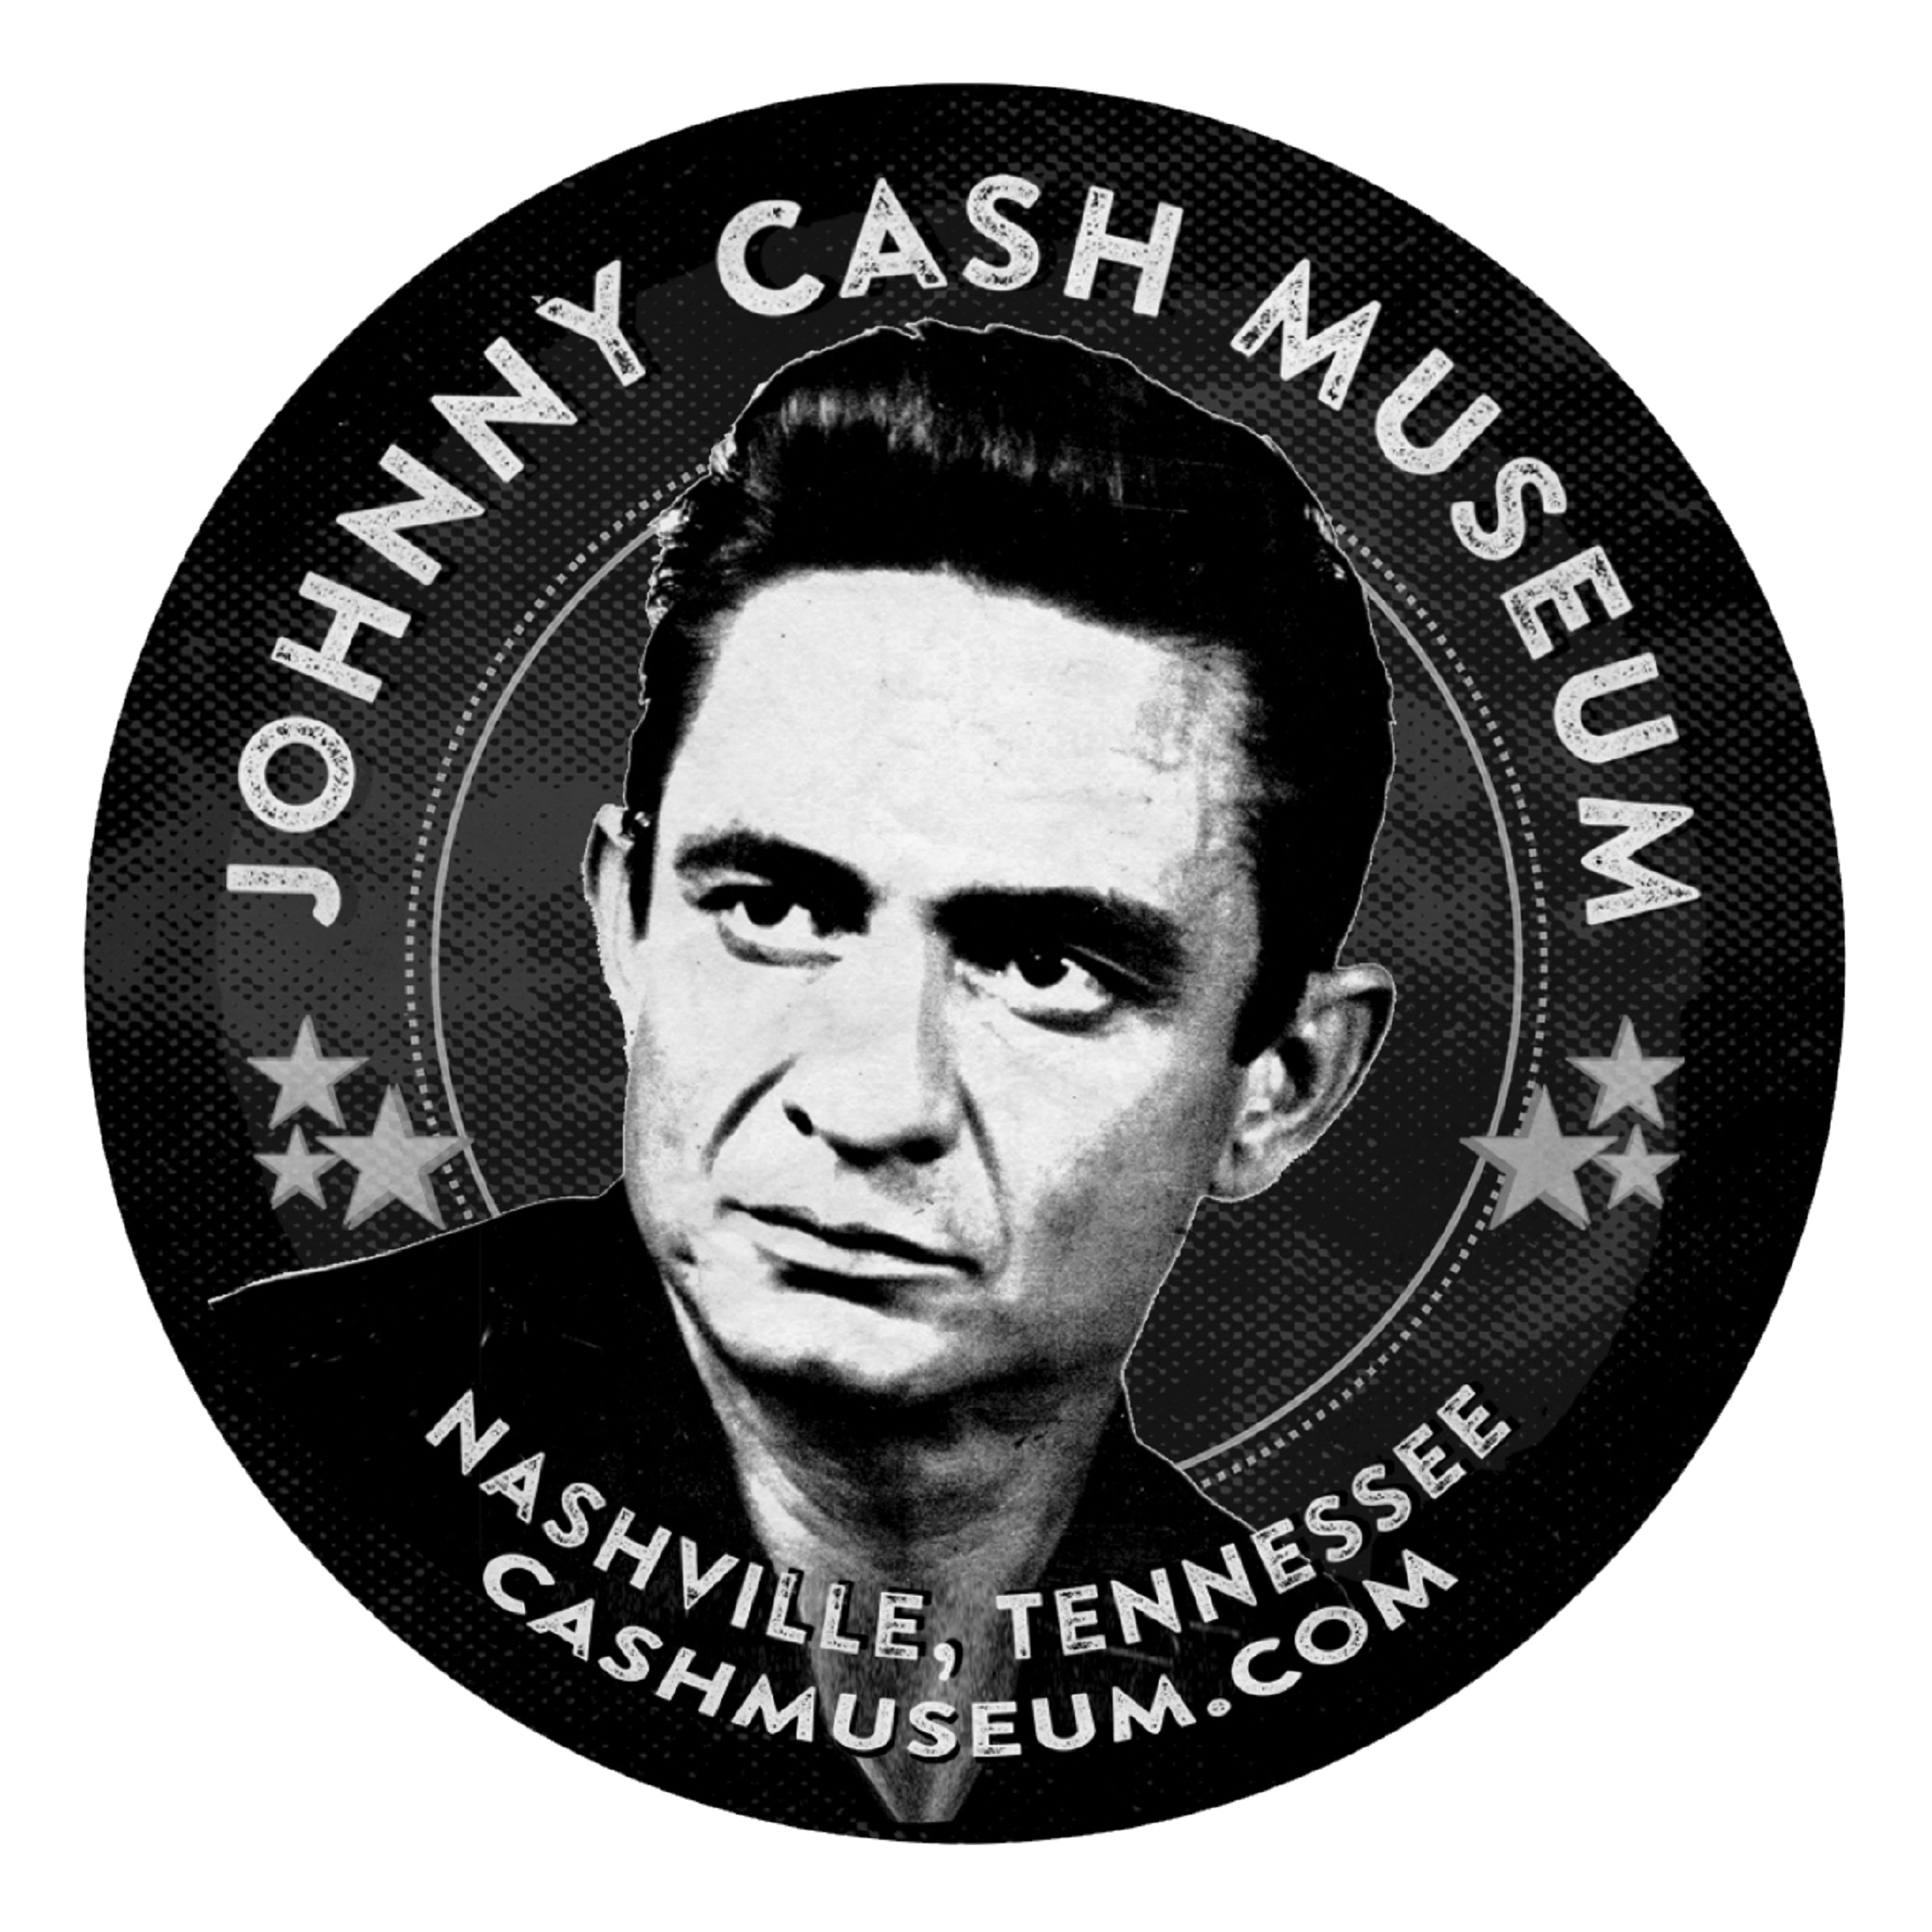 The Johnny Cash Museum, Honored As The Reigning USA Today 10 Best Music Museum Winner, Is Once Again In The Running For The Prestigious Award